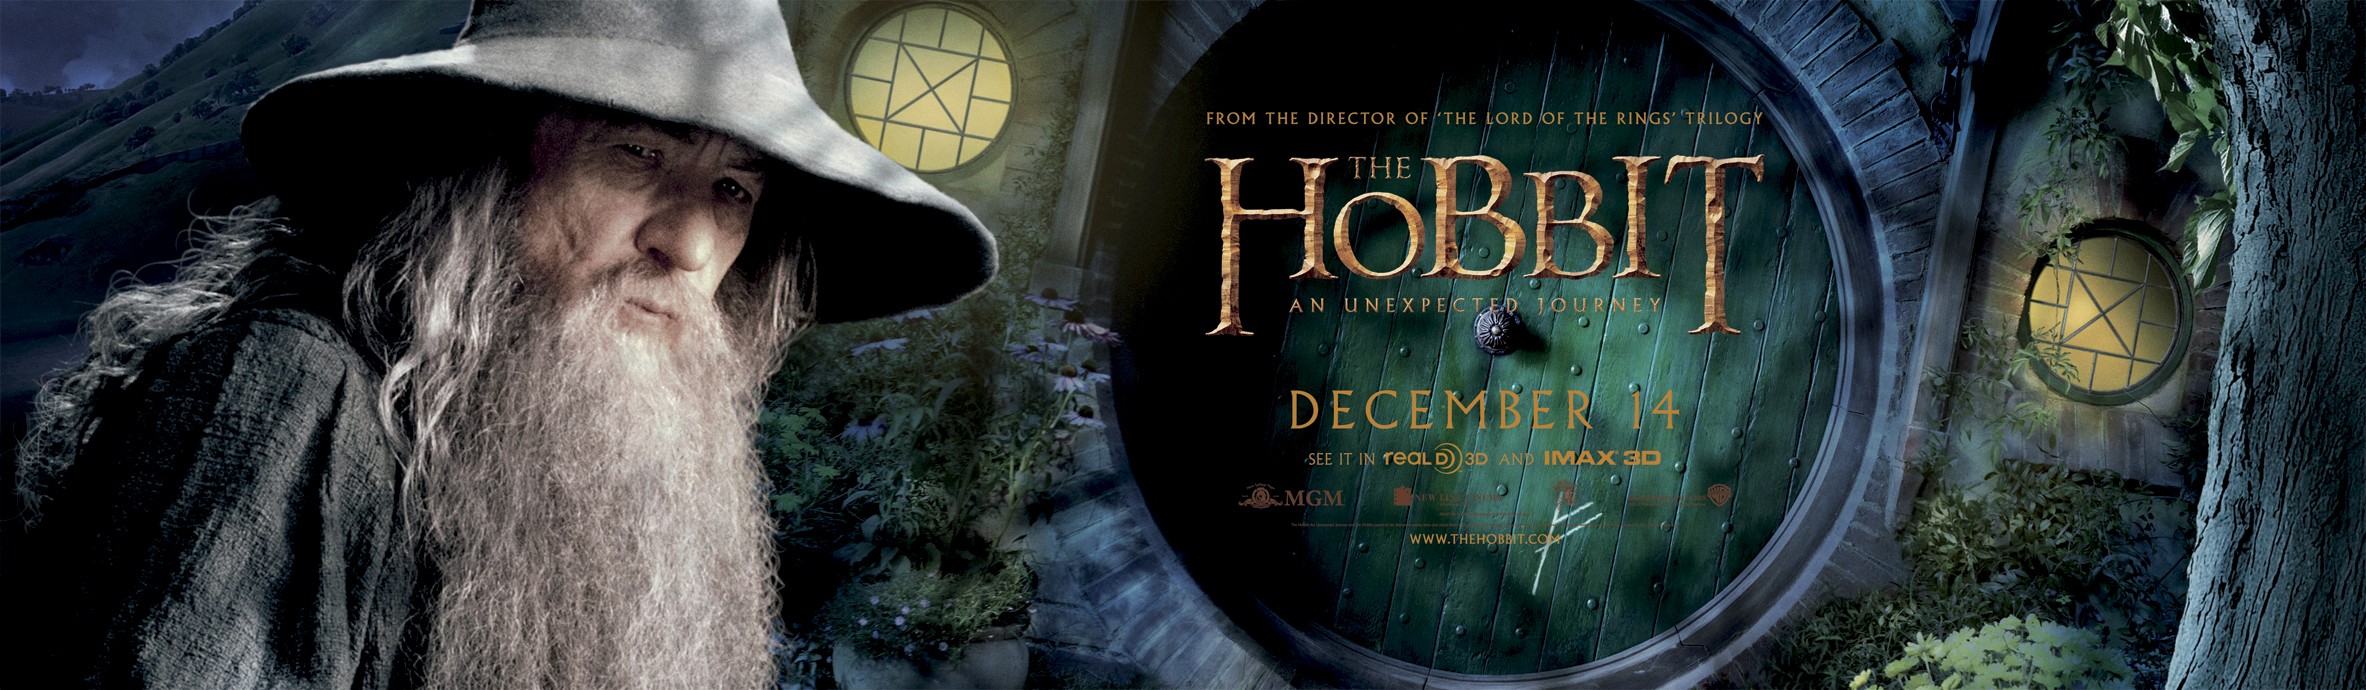 Mega Sized Movie Poster Image for The Hobbit: An Unexpected Journey (#8 of 39)